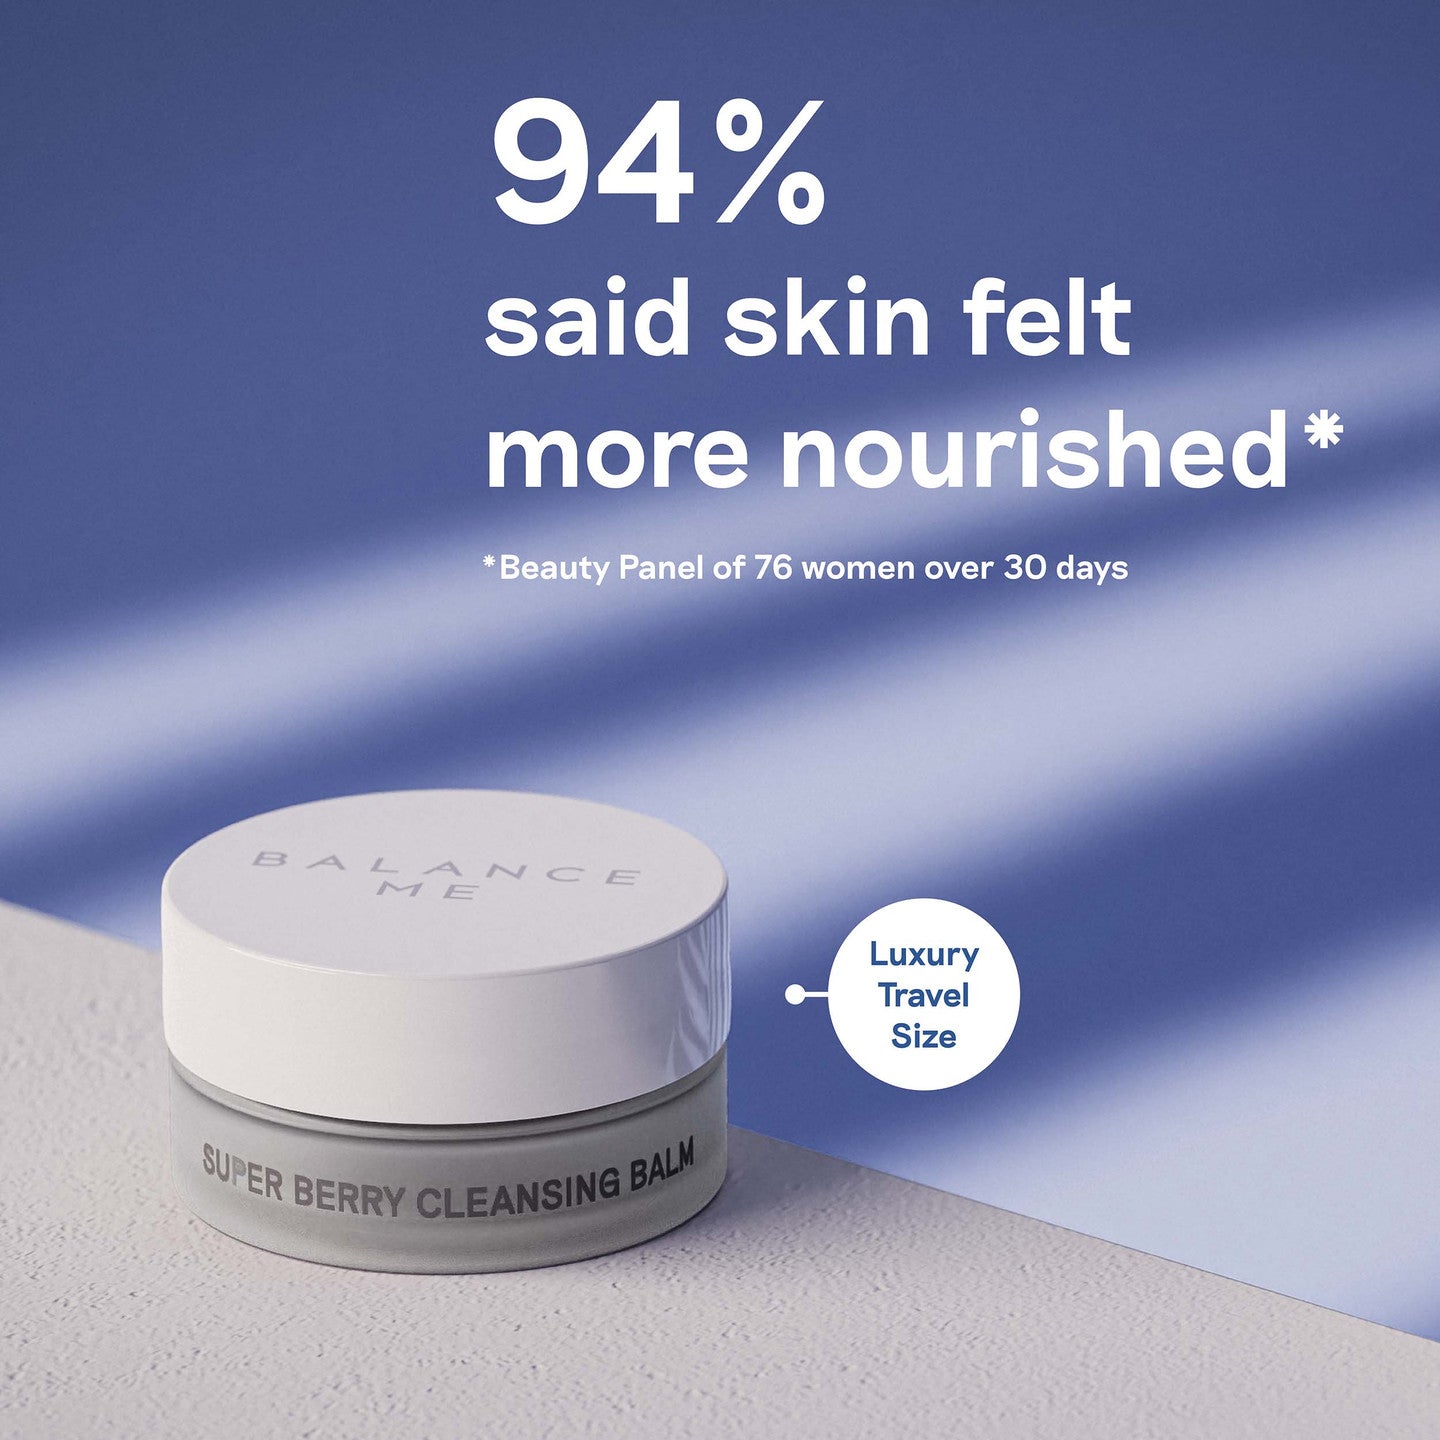 Super Berry Cleansing Balm 5g